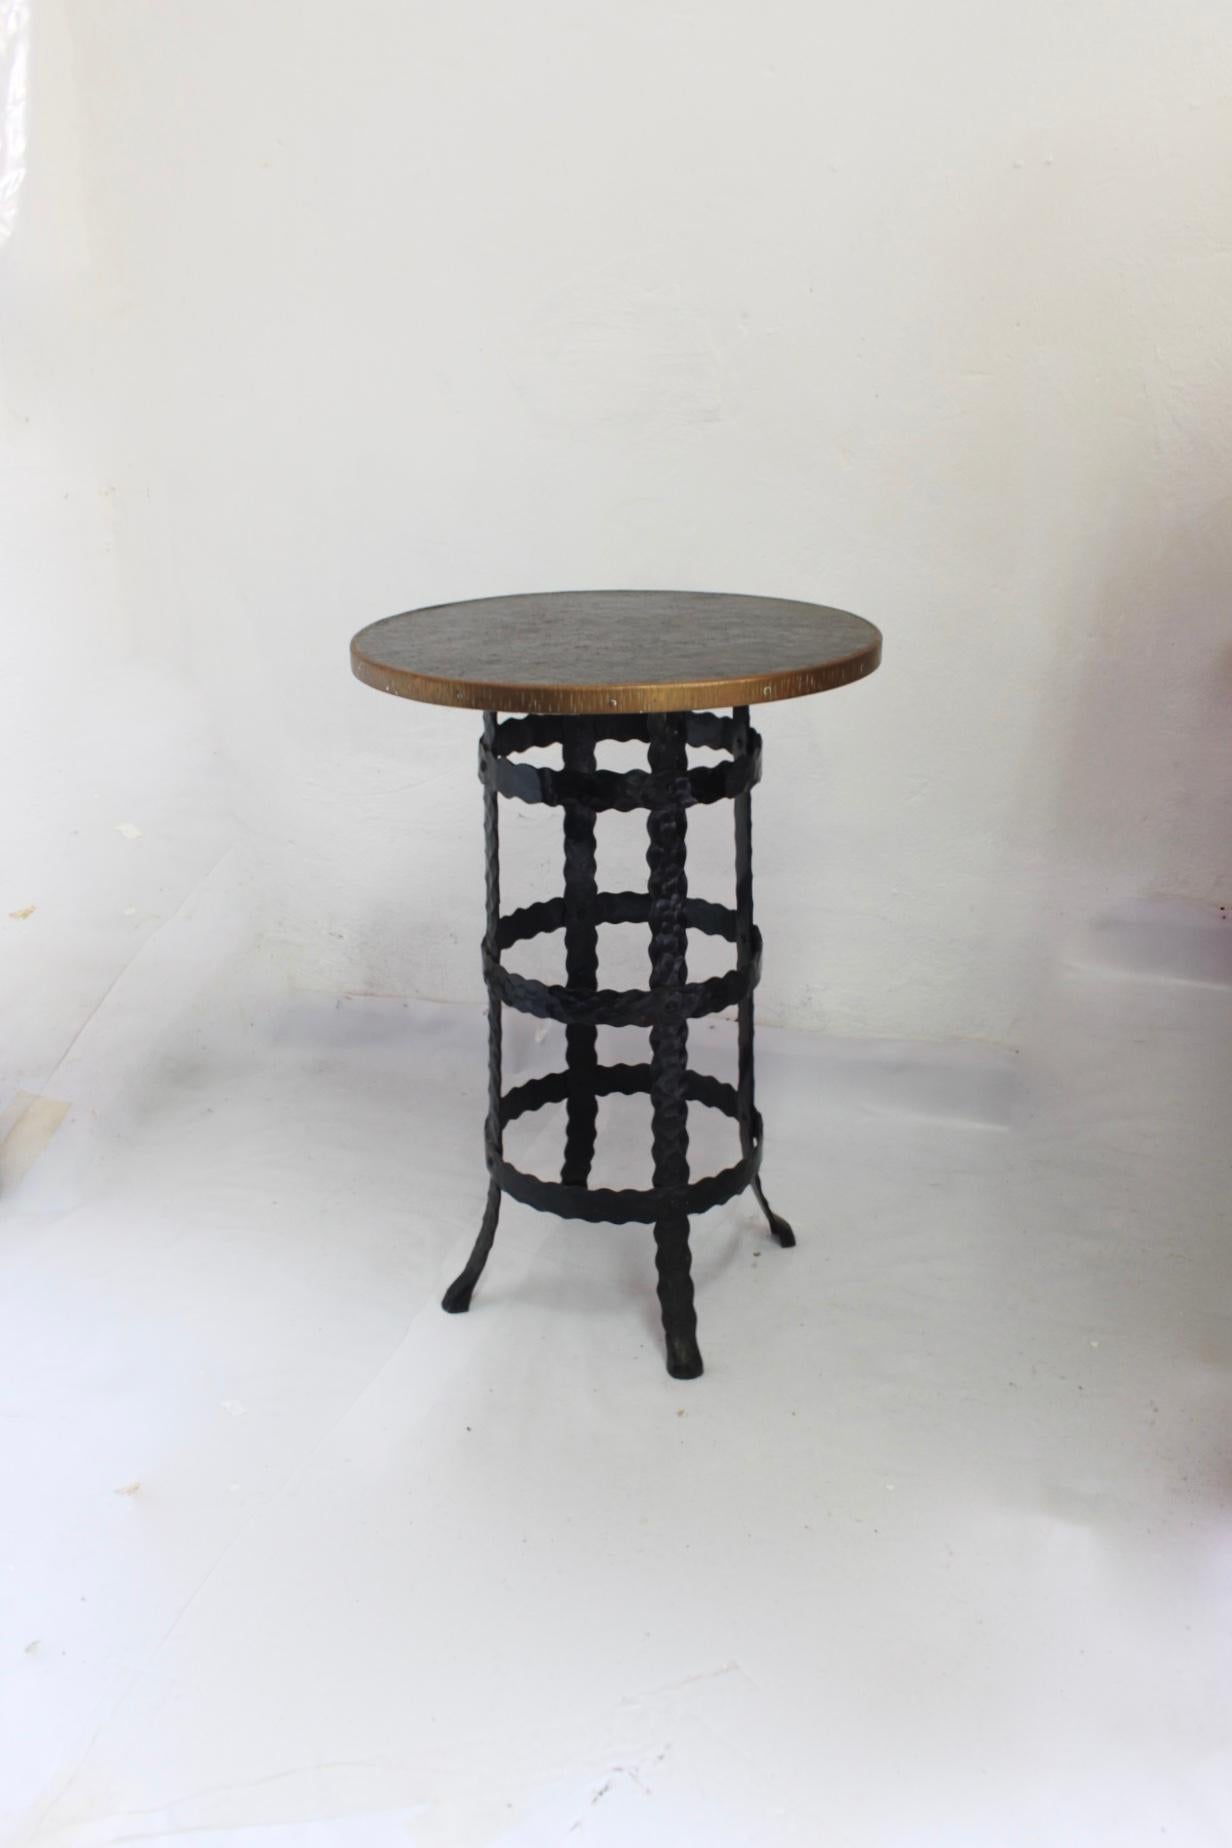 Midcentury wrought iron and wood round coffee or side high table, 1950s the piece features black wood and an embossed metal top, a brass outer ring, and legs finishing in lion paw shapes.